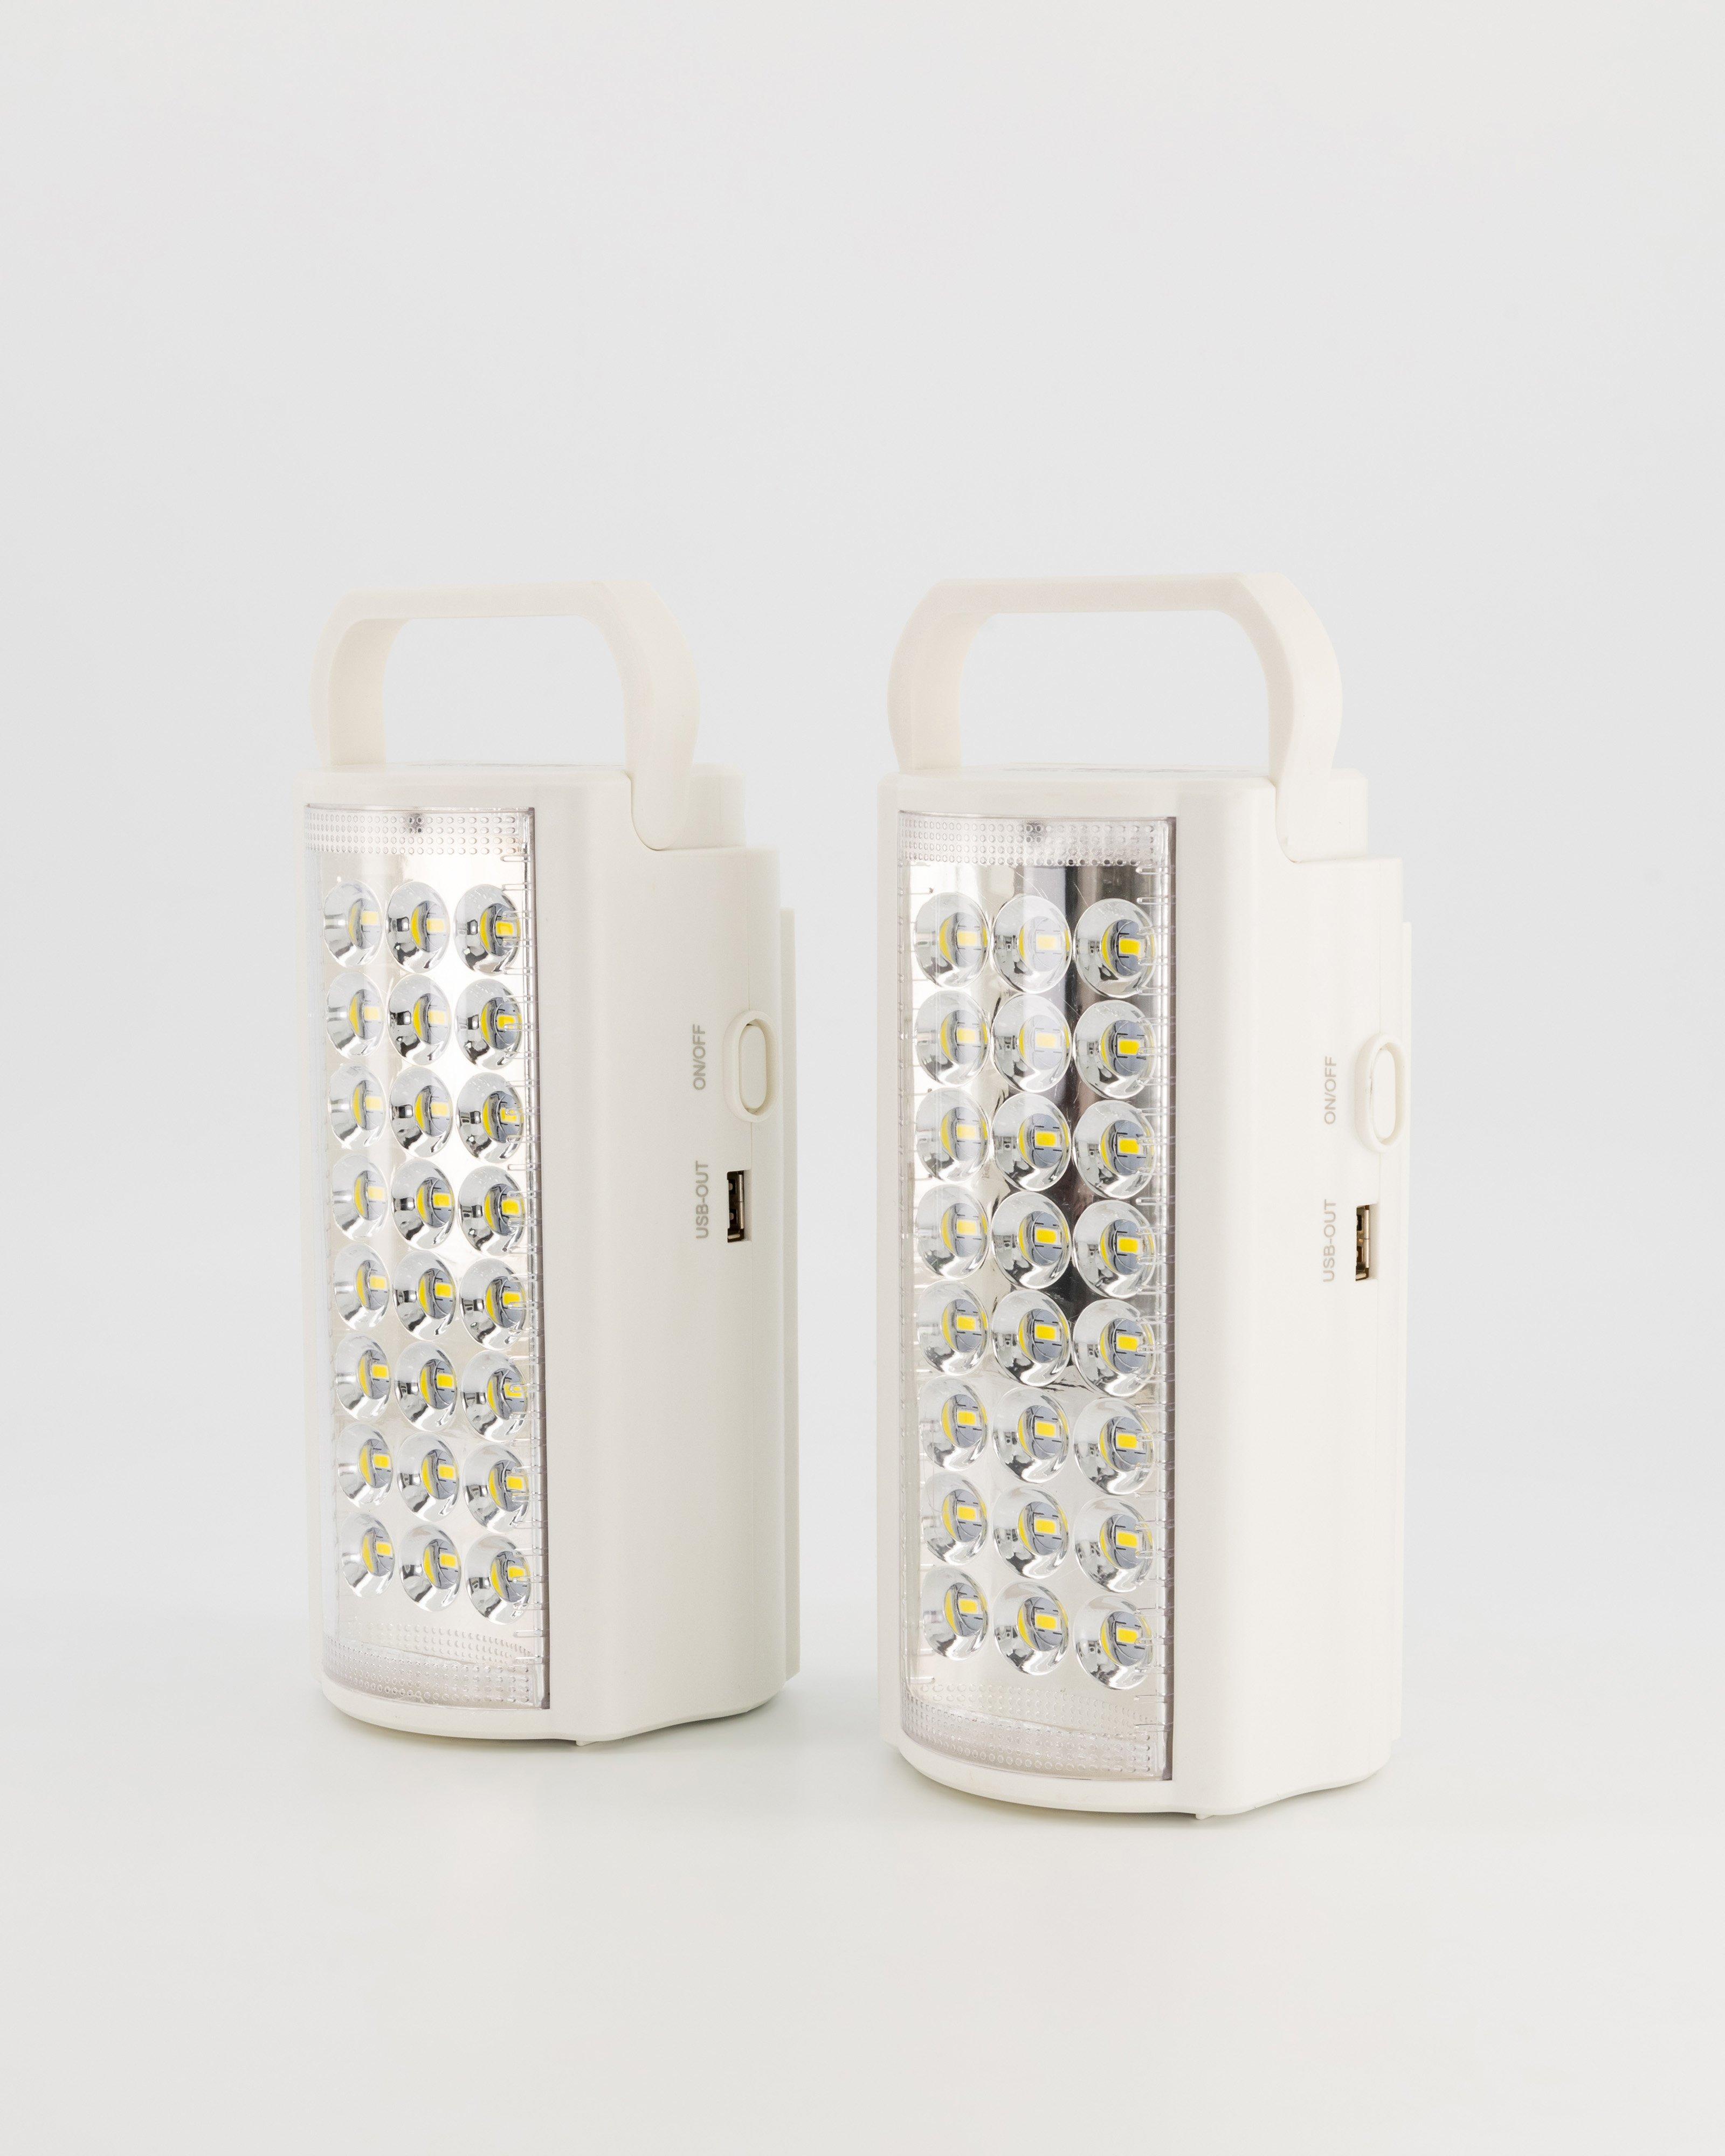 UltraTec 800-Lumen Lithium Battery Lanterns with Power Bank -  No Colour